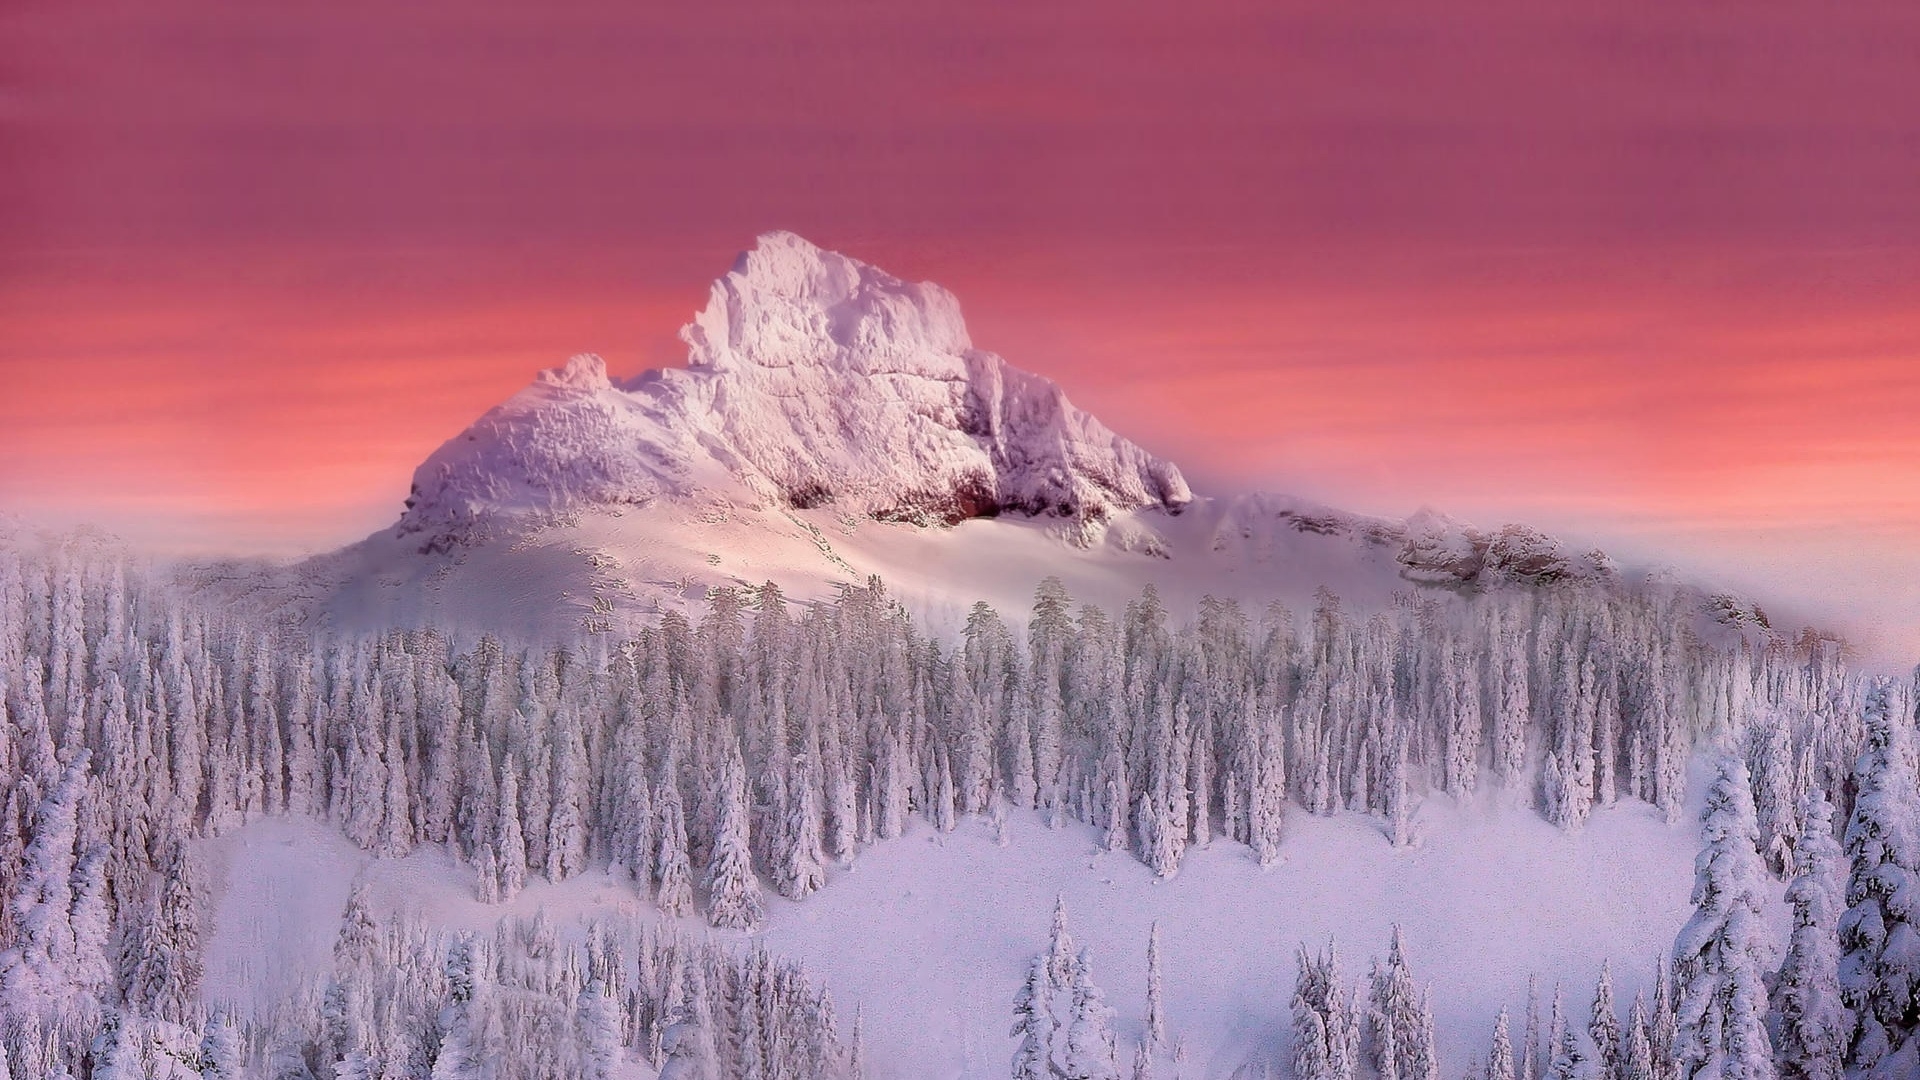 Snow Winter Mountain for 1920 x 1080 HDTV 1080p resolution